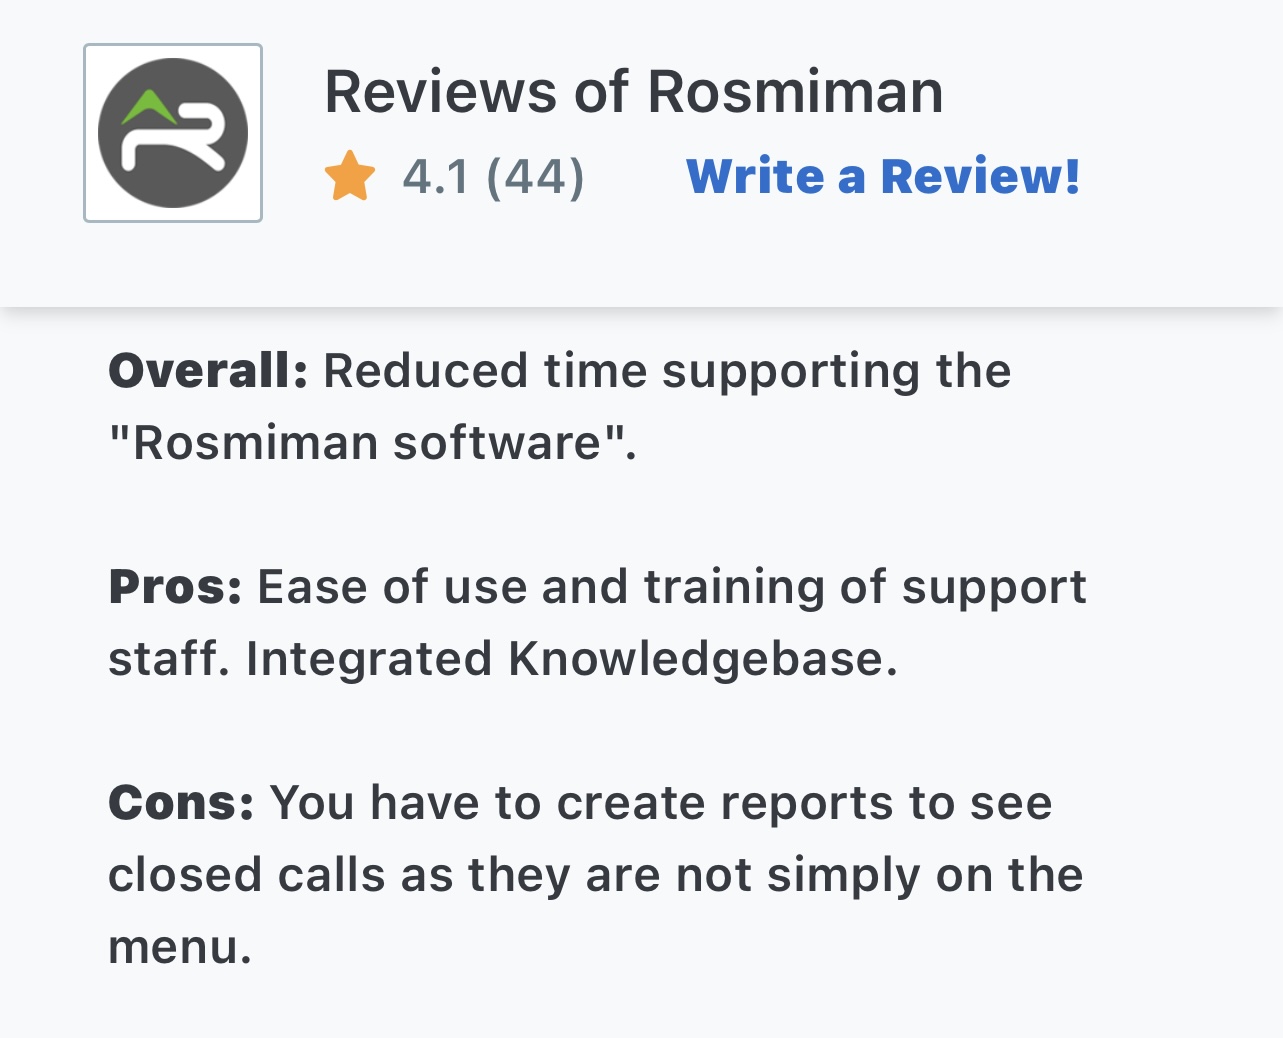 Rosmiman Pros and Cons